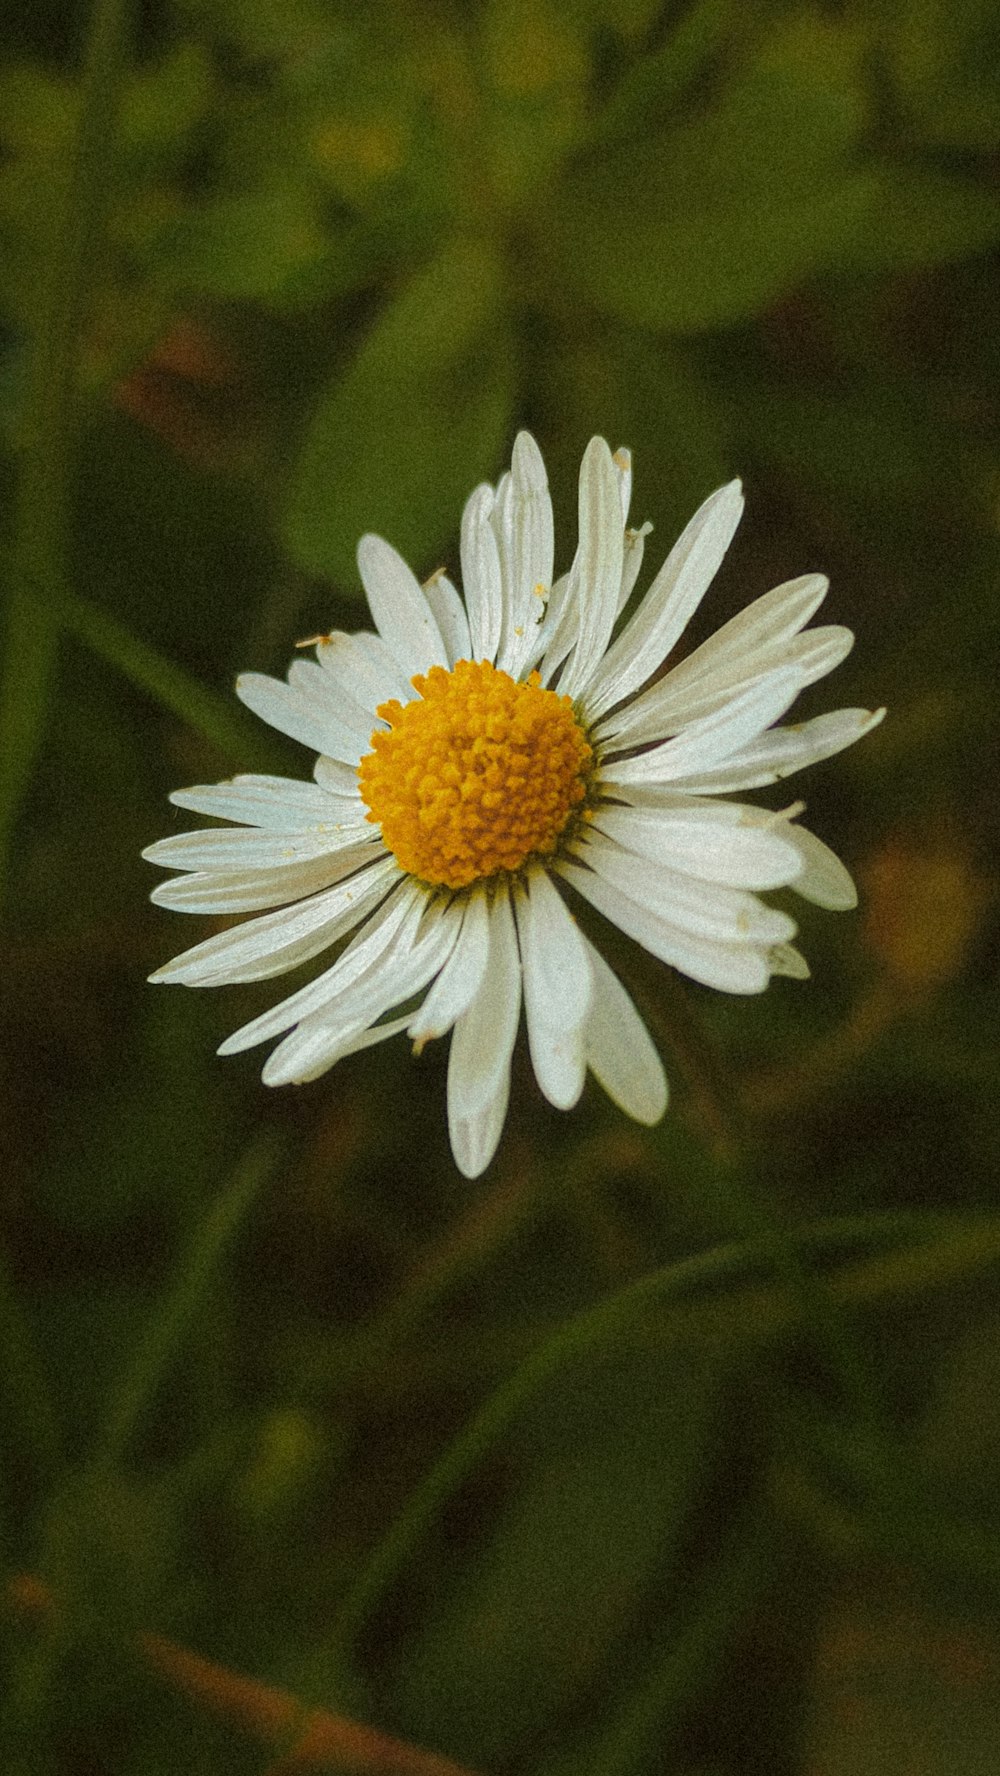 a white flower with a yellow center in a field